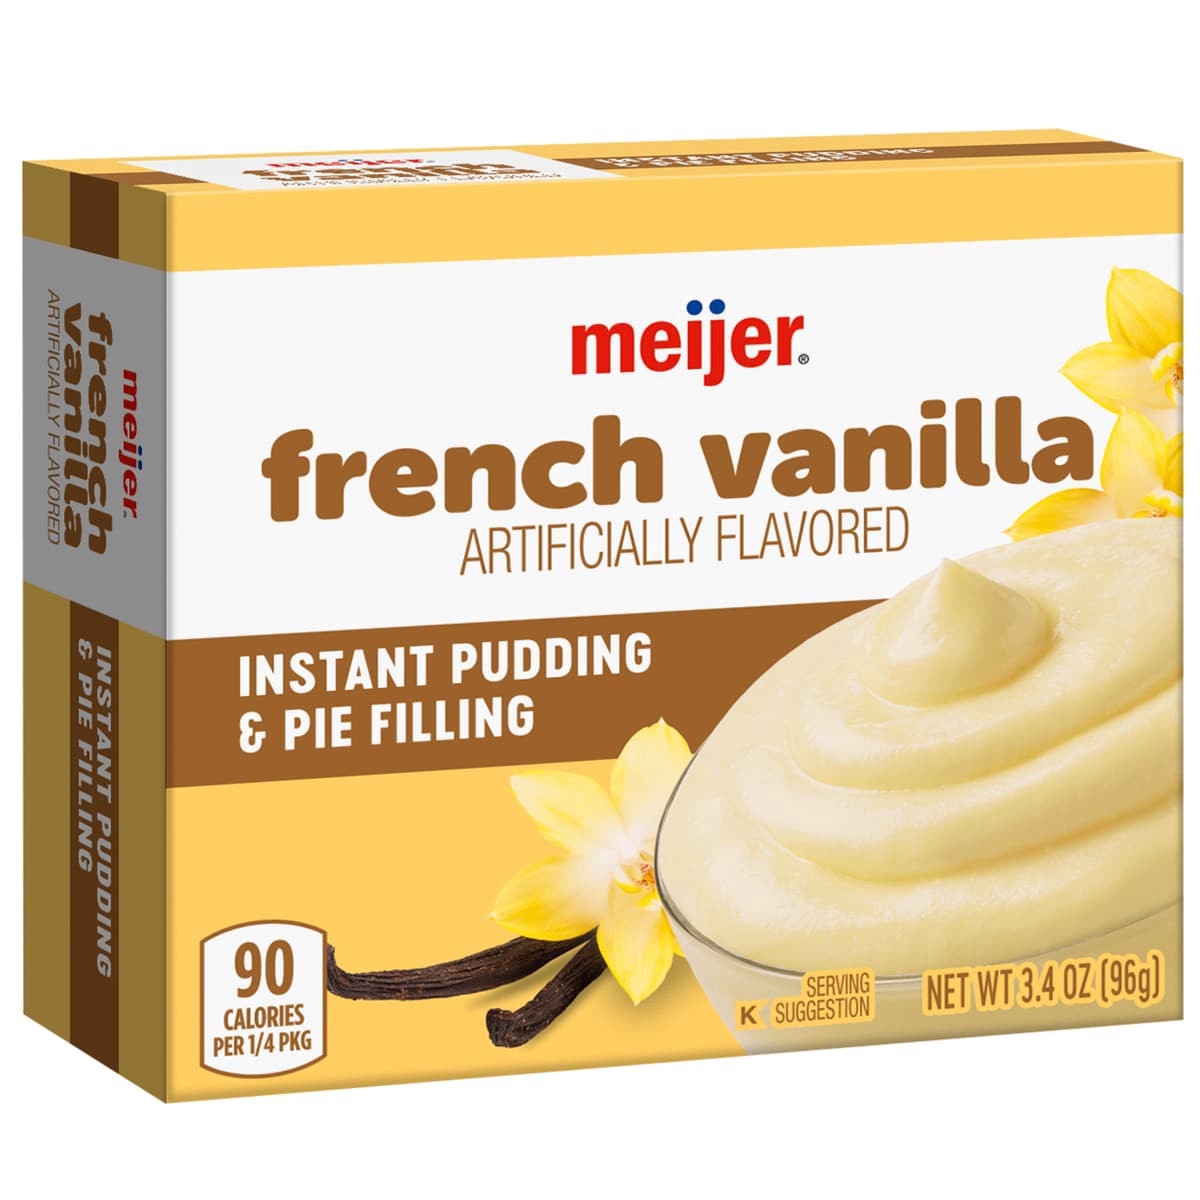 slide 5 of 29, Meijer Instant French Vanilla Pudding & Pie Filling, 3.4 oz